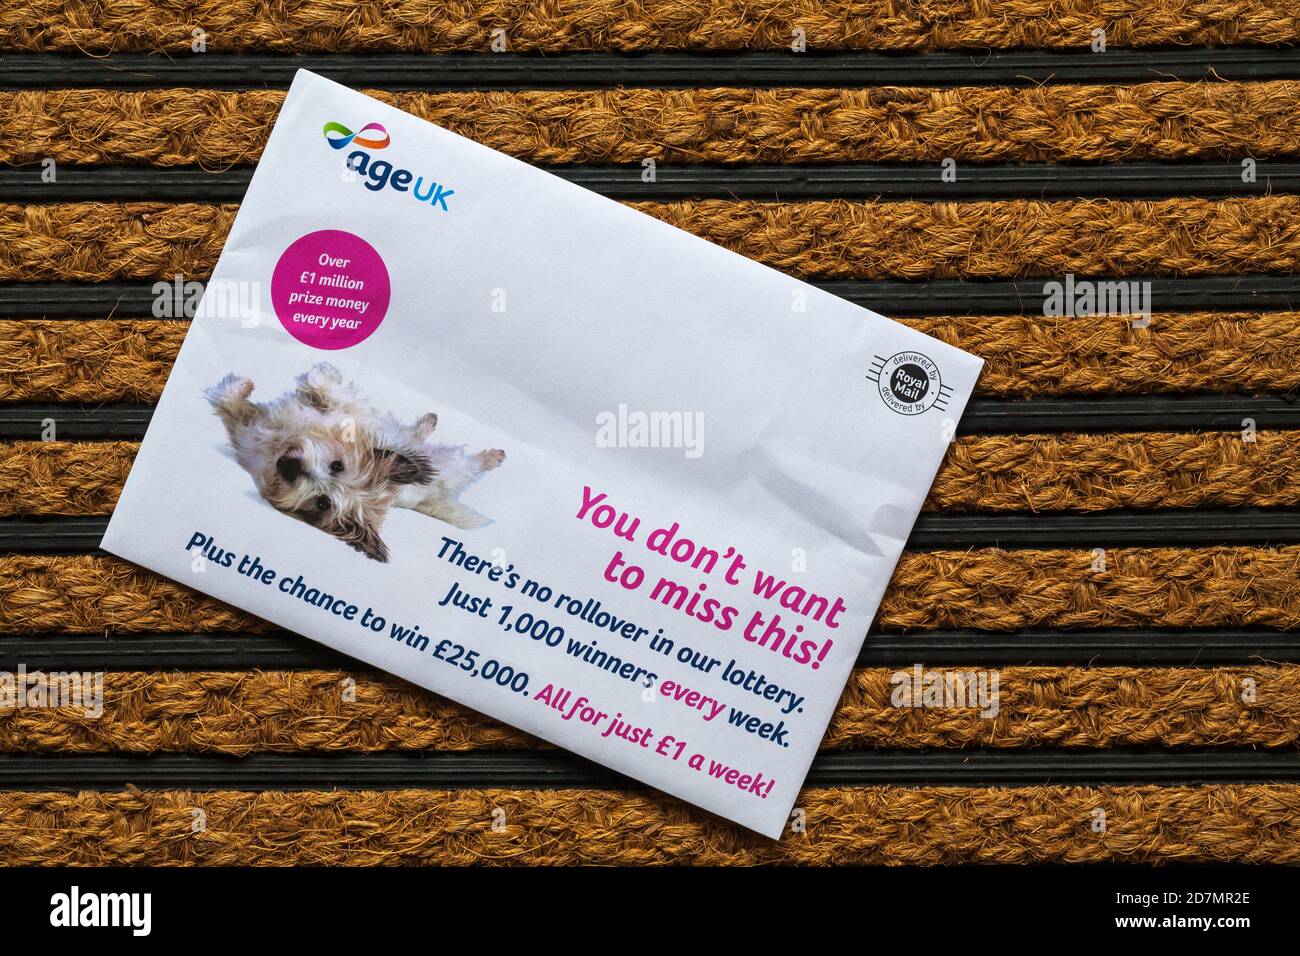 Post mail on doormat - Age UK weekly lottery Stock Photo